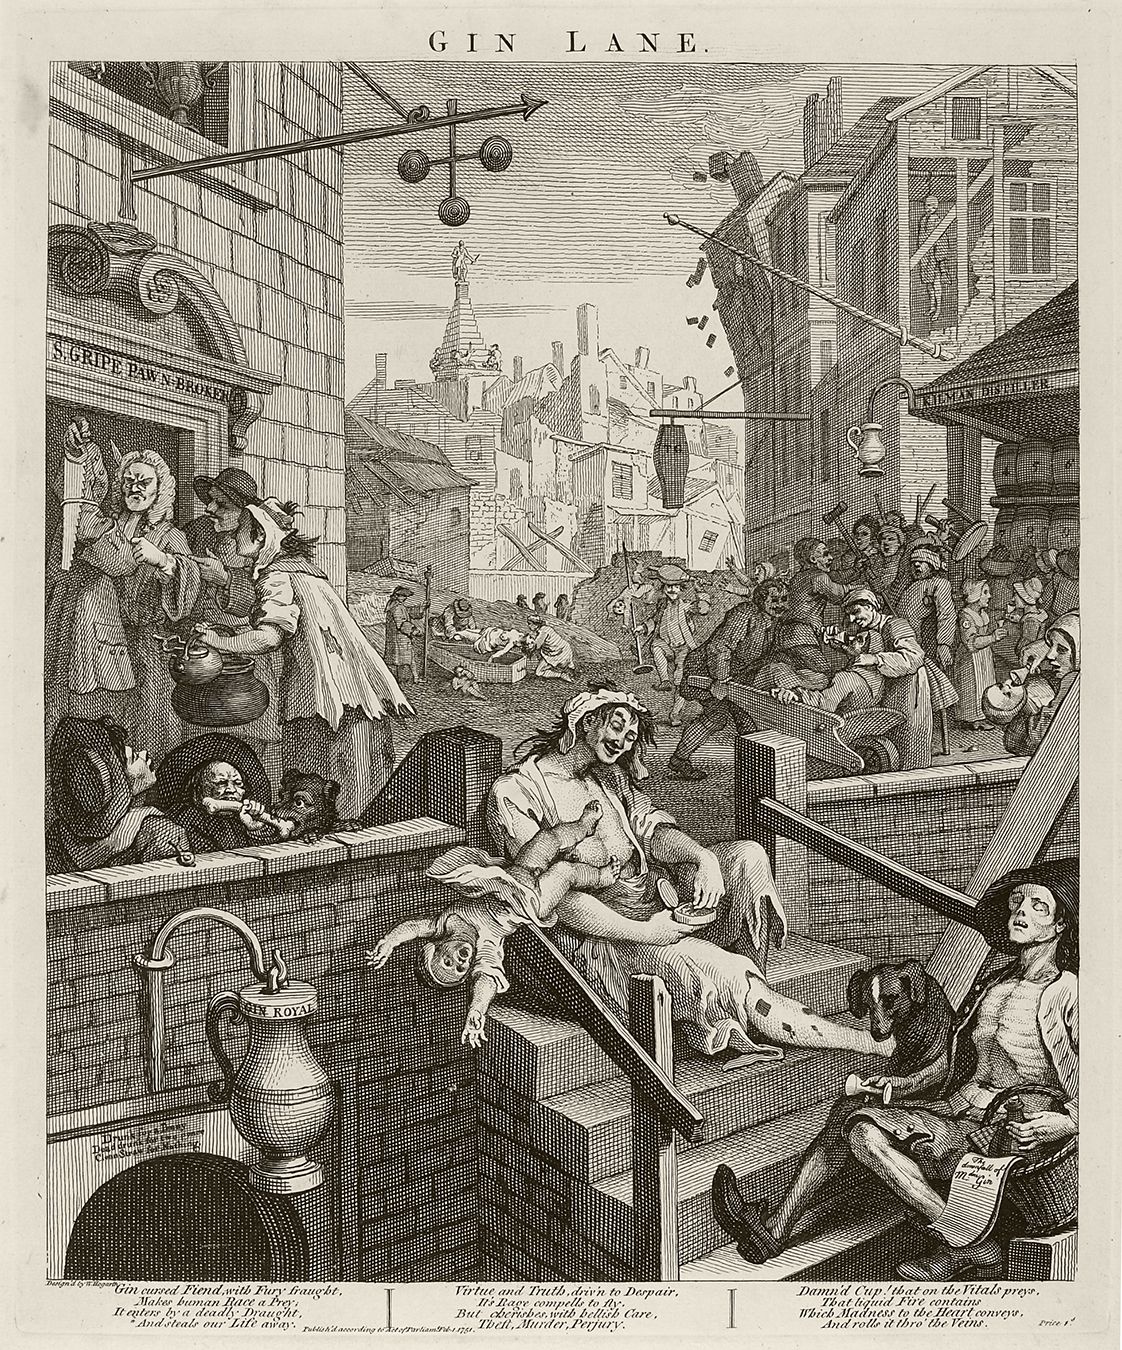 Black and white etching of an 18th century street scene depicting groups of villagers drinking and socializing.